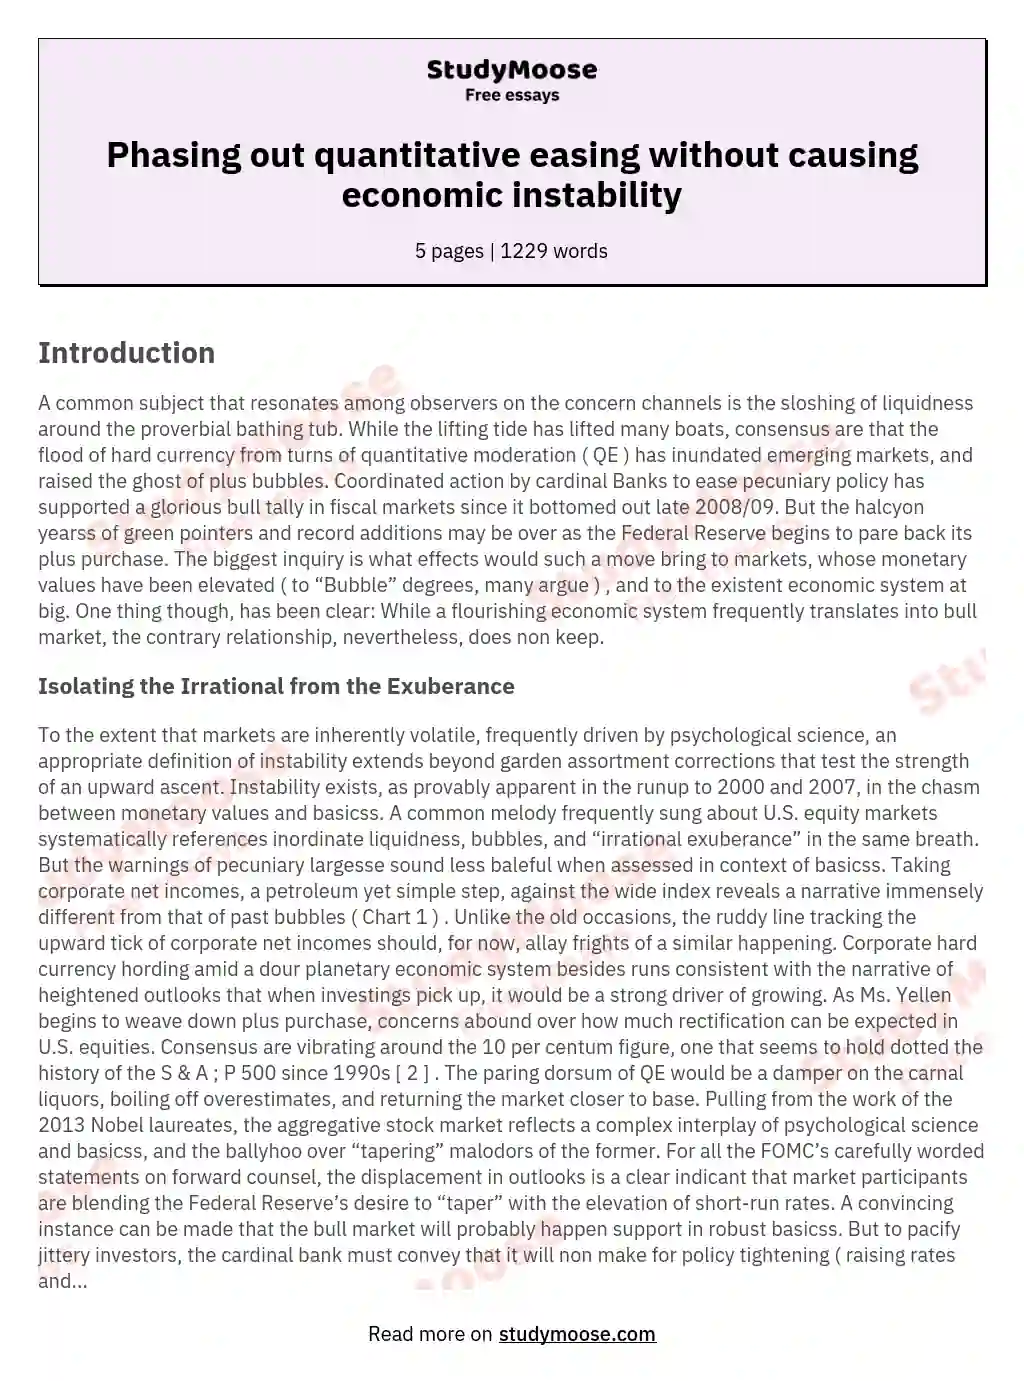 Phasing out quantitative easing without causing economic instability essay